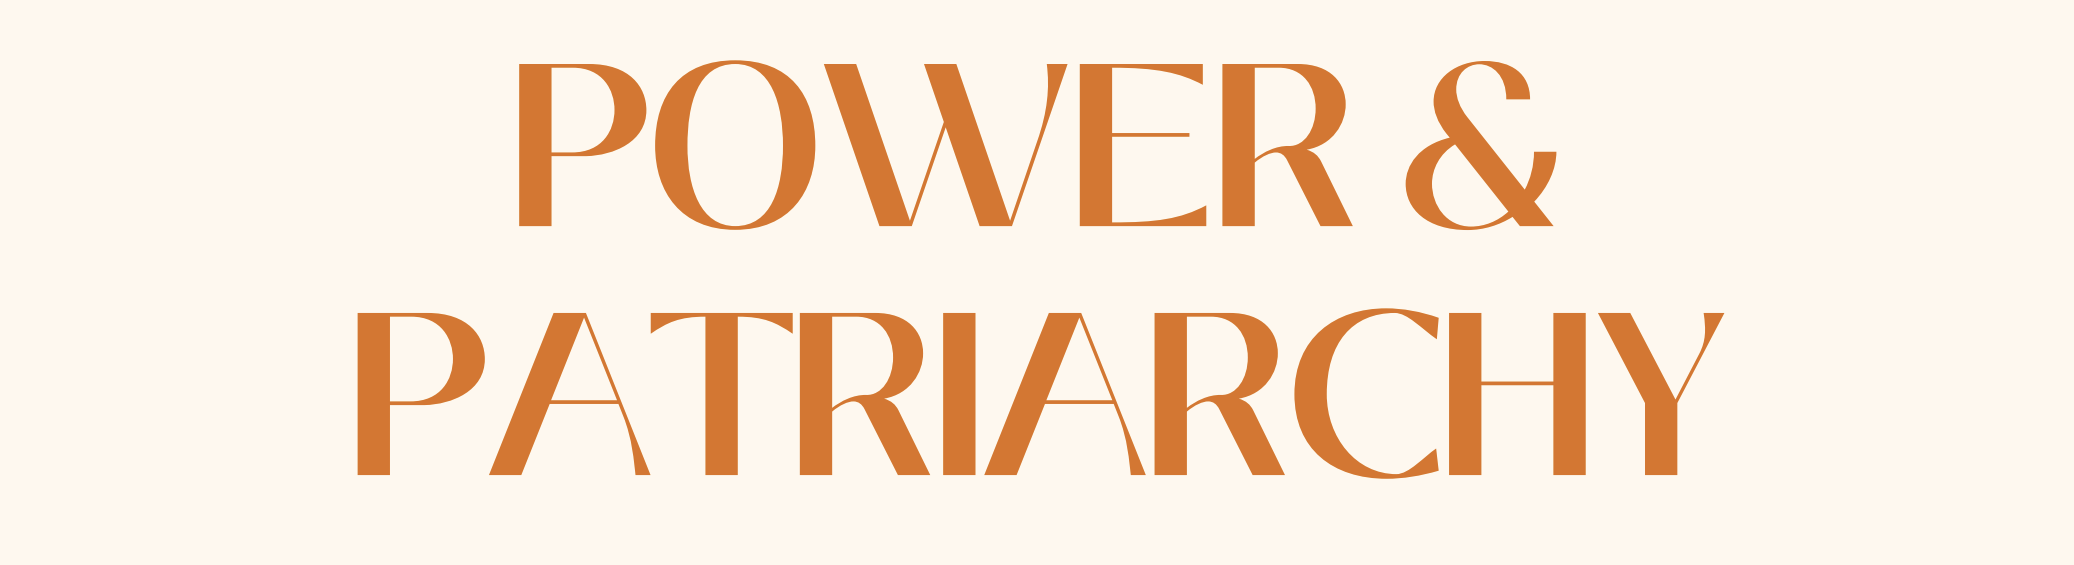 Power and Patriarchy banner image